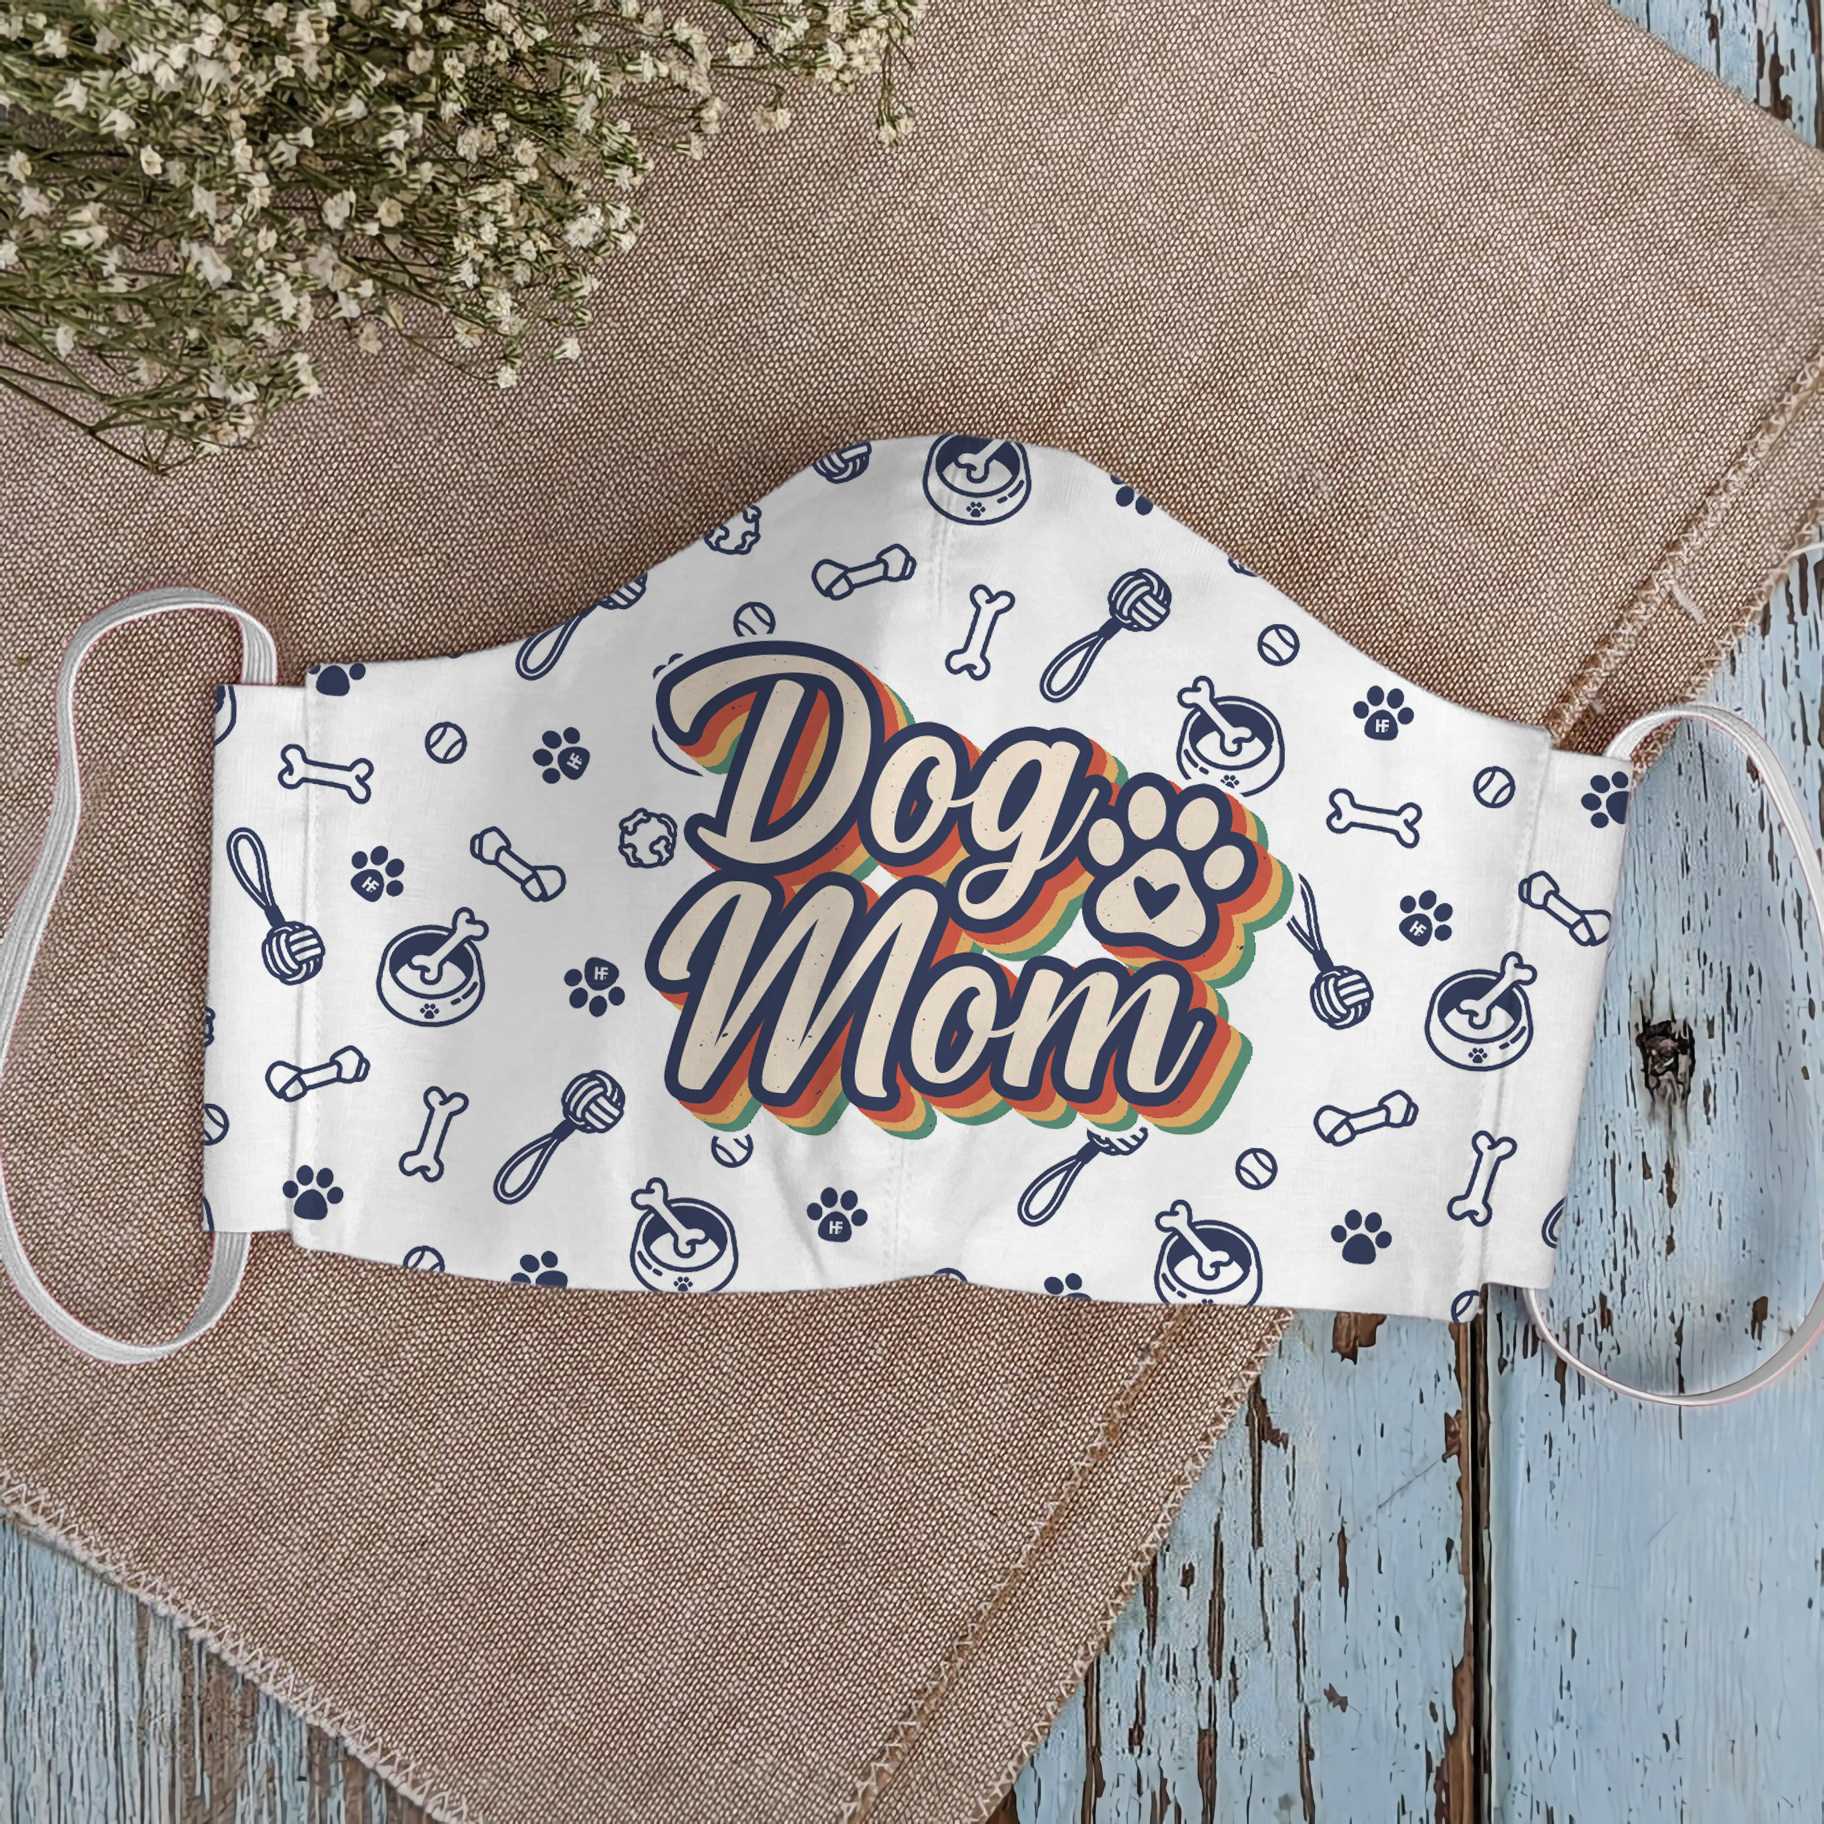 Dog Mom With Little Heart EZ35 1803 Face Mask